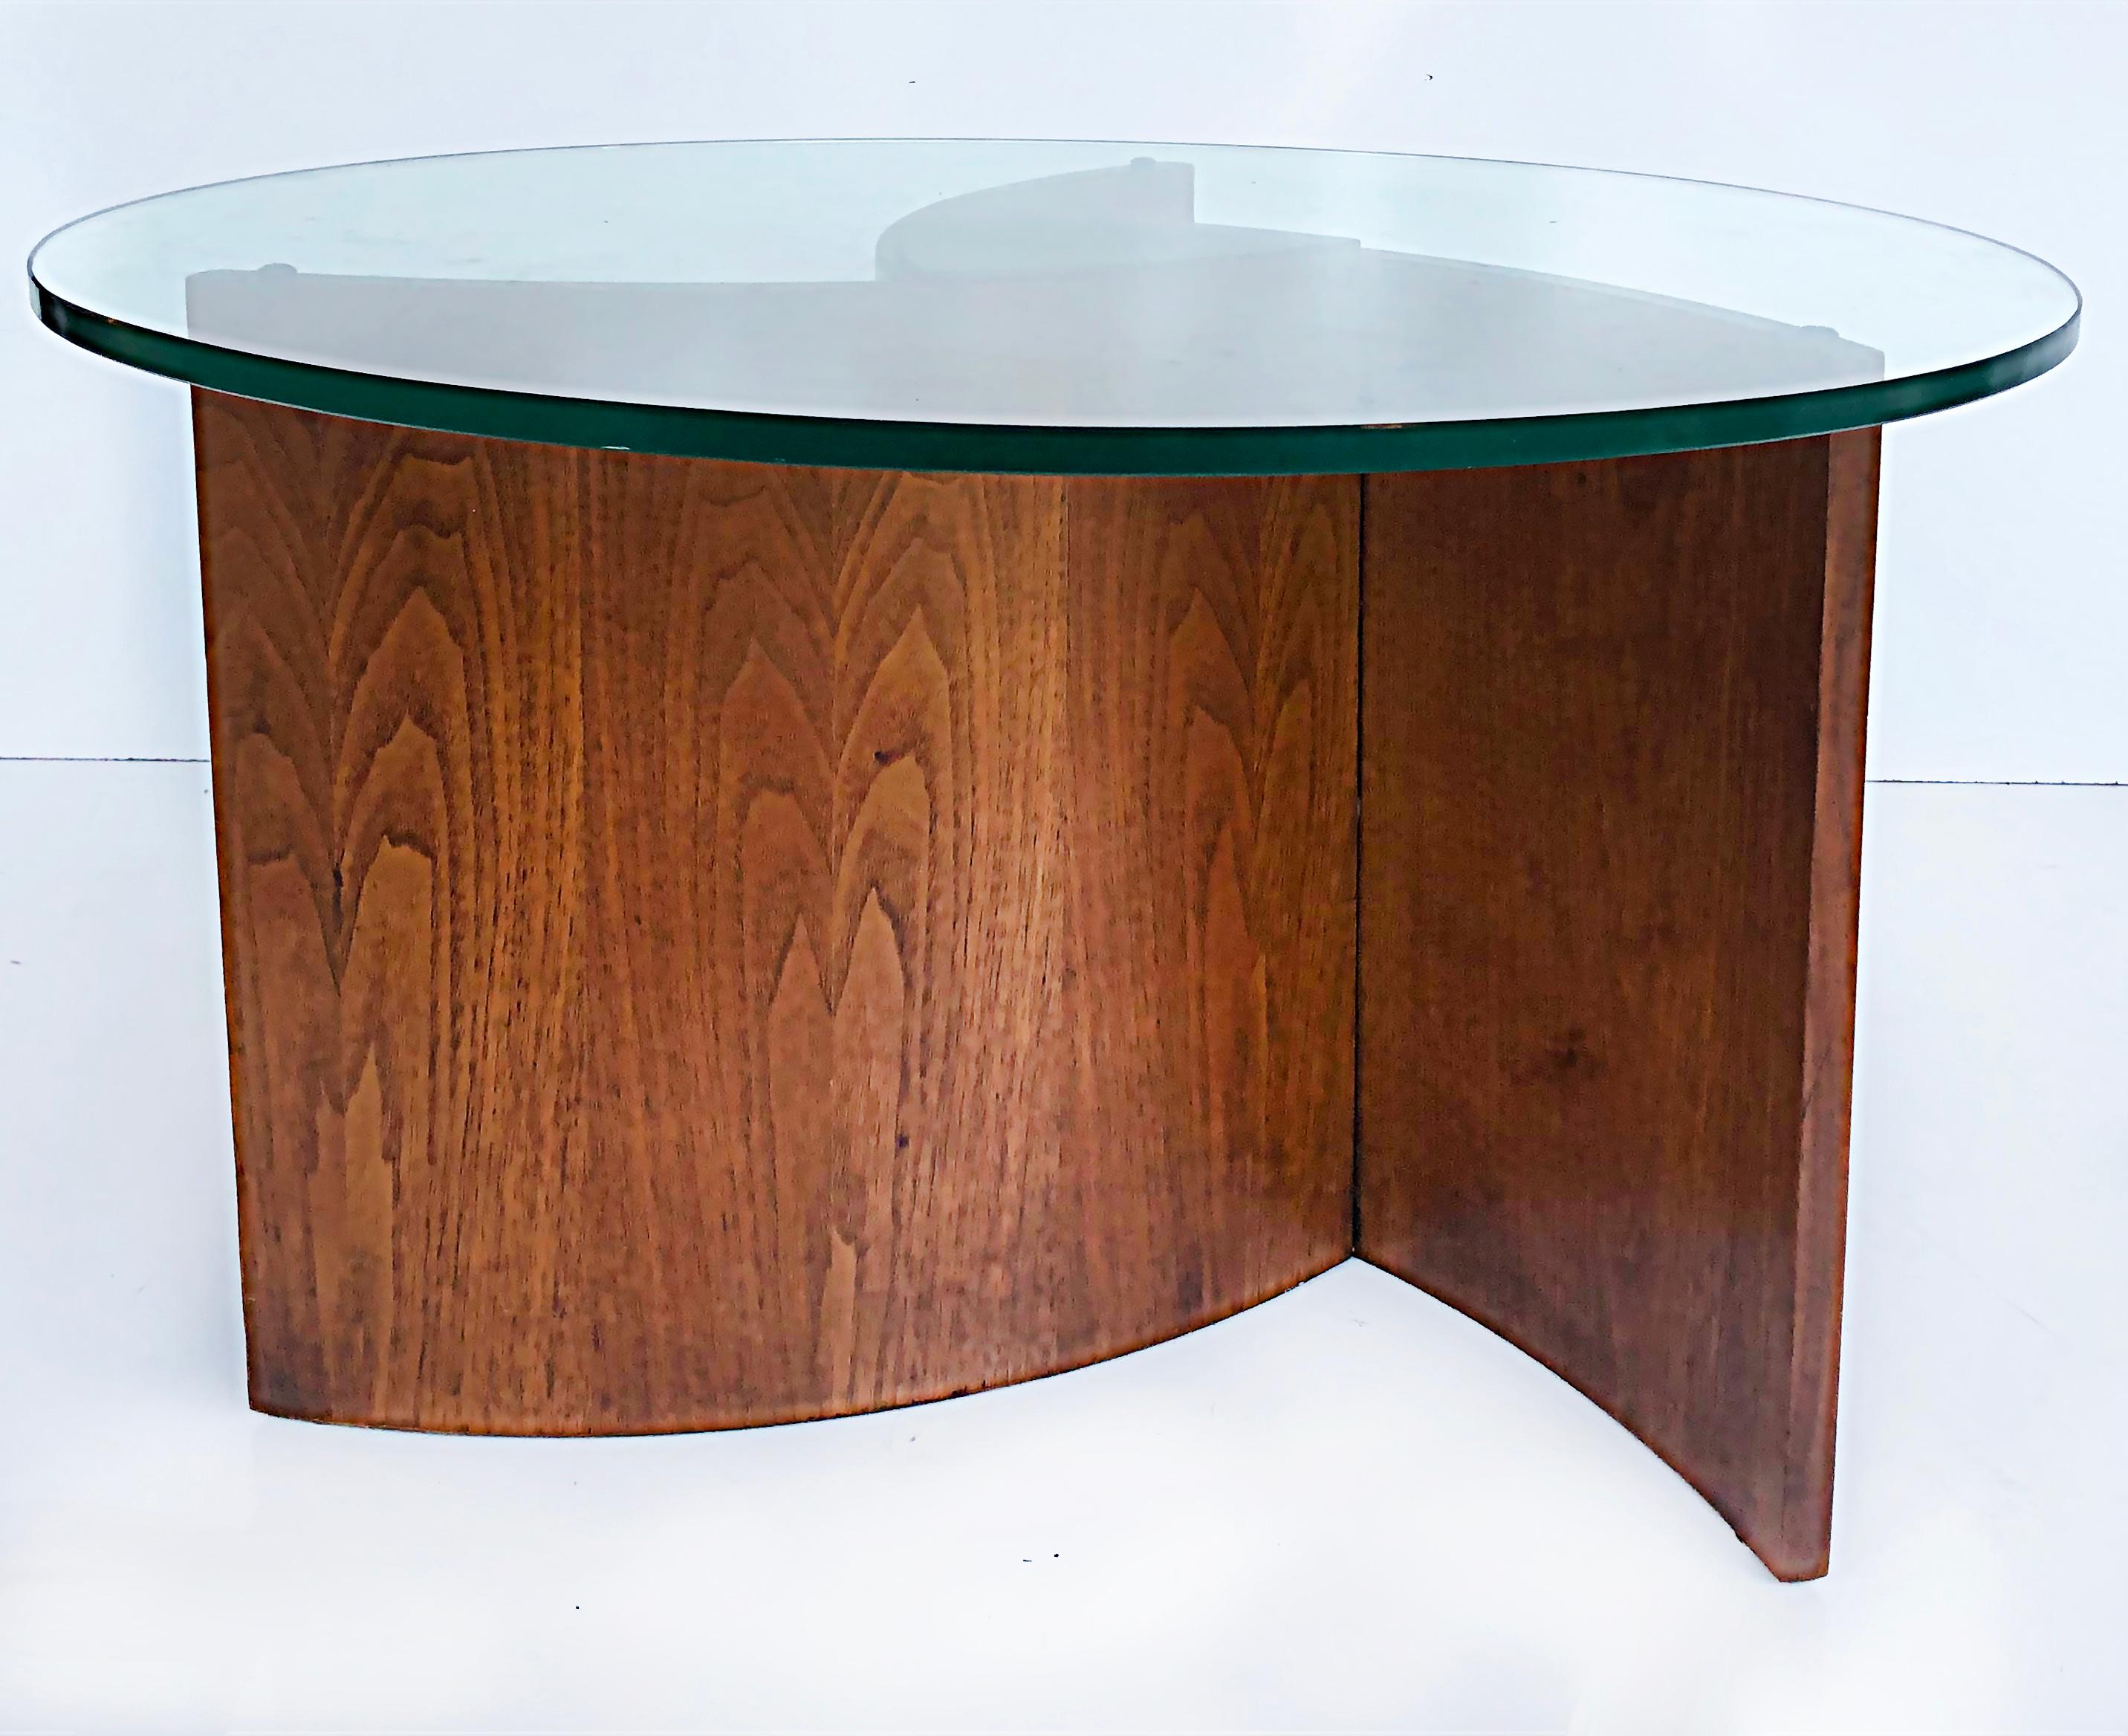 20th Century Vintage Vladimir Kagan Propellor Form Walnut Coffee Table with Glass Top, 1960s